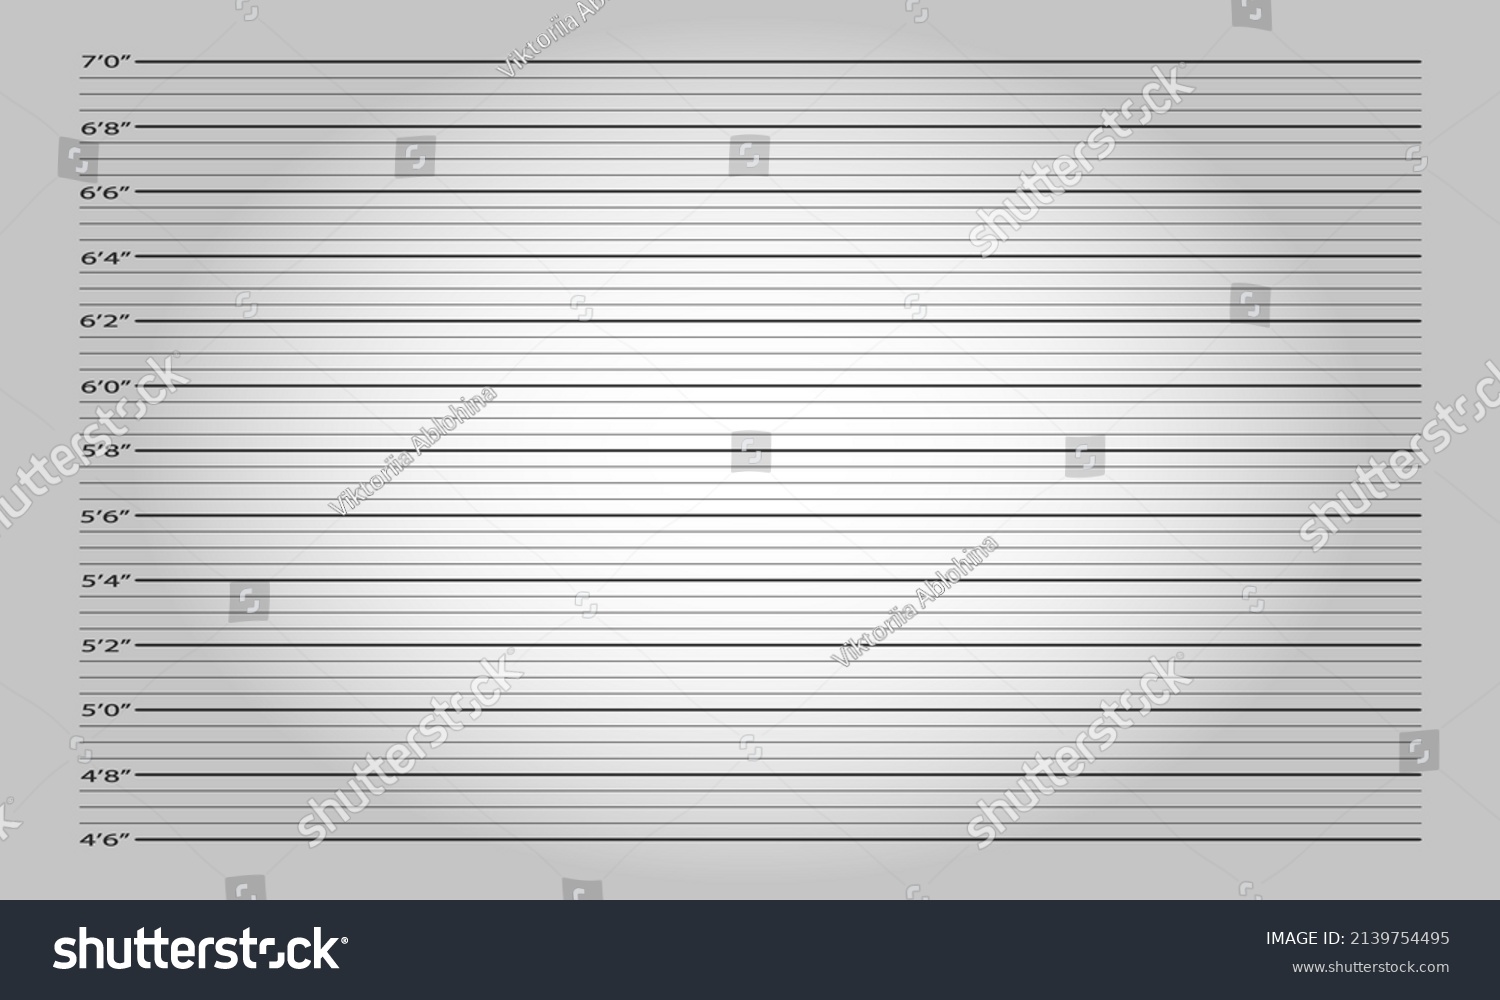 1,175 Photo arrested person Images, Stock Photos & Vectors | Shutterstock